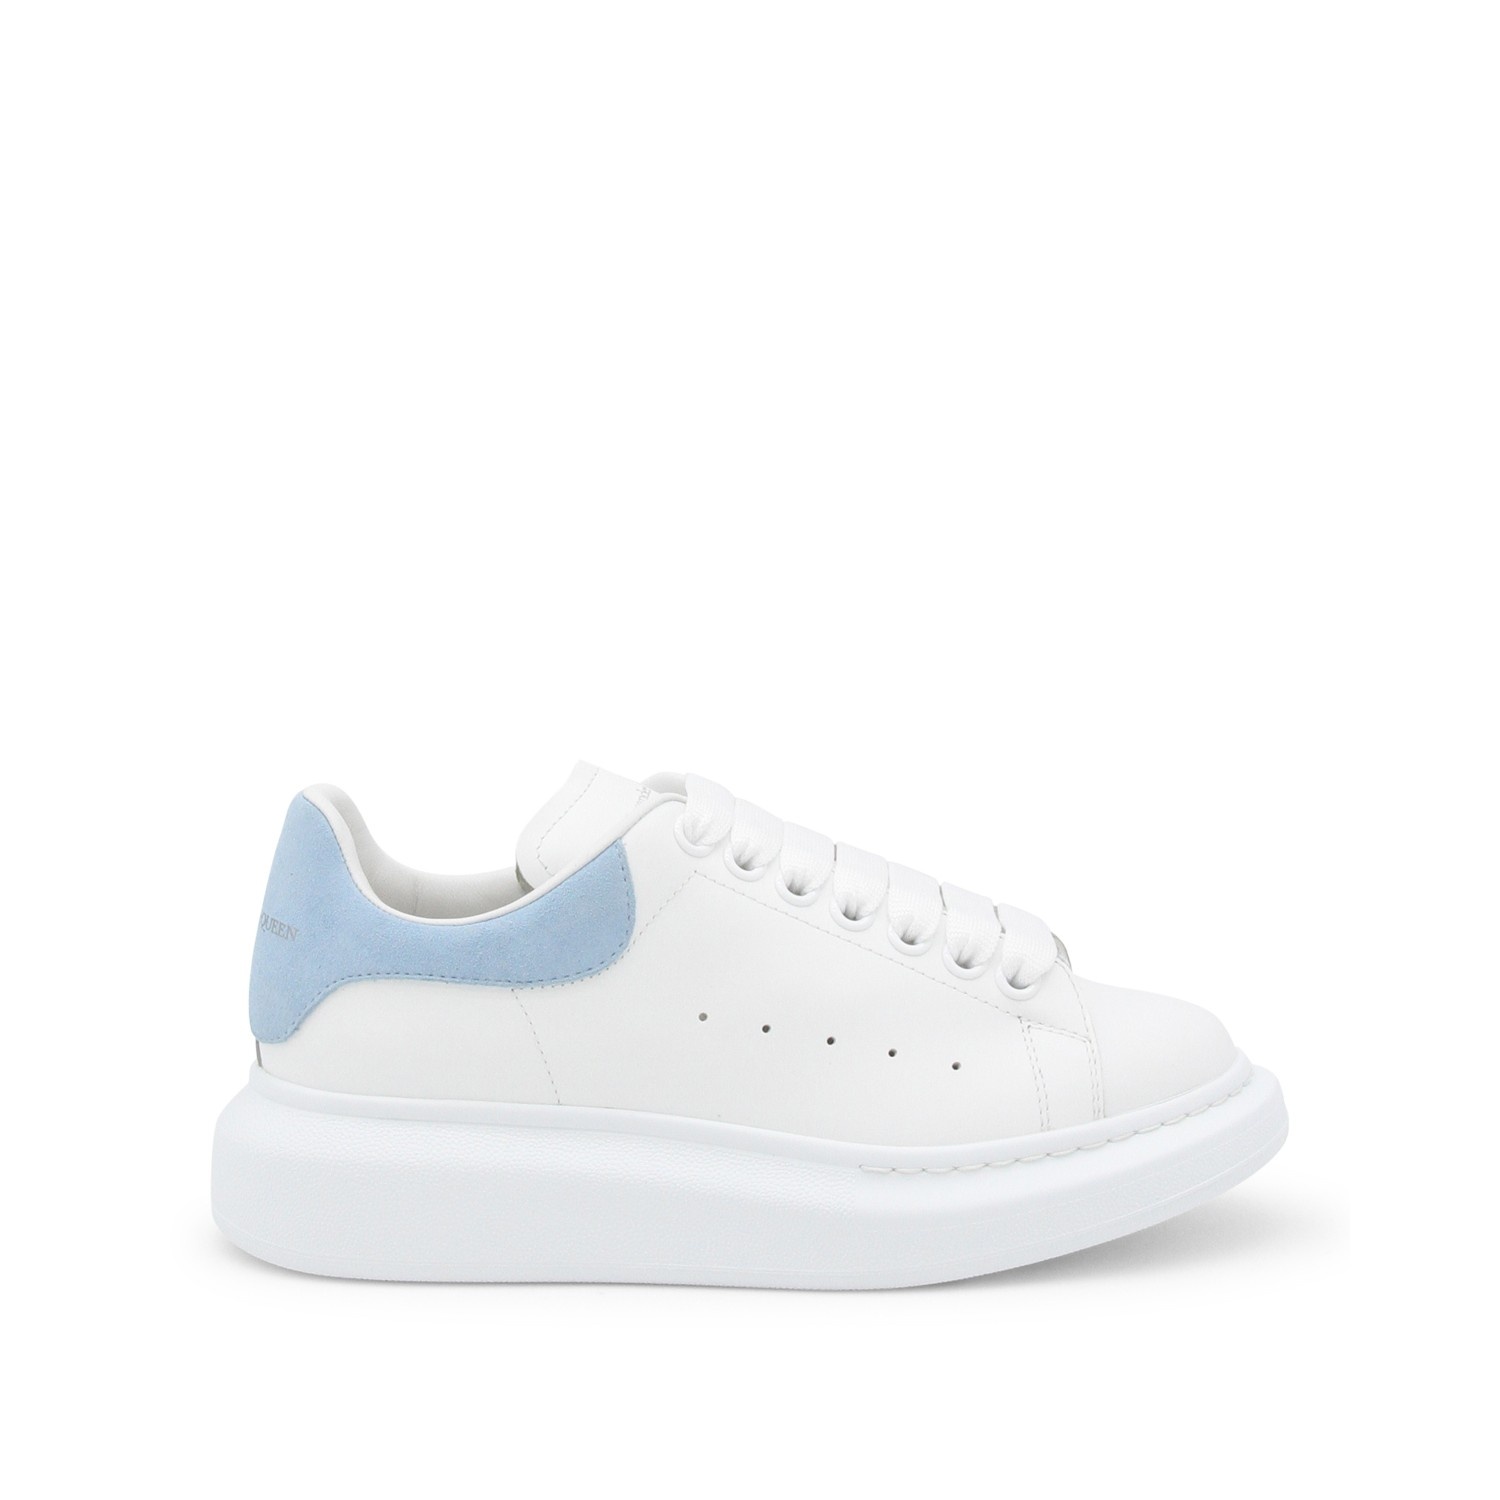 WHITE AND POWDER BLUE LEATHER OVERSIZED SNEAKERS - 1